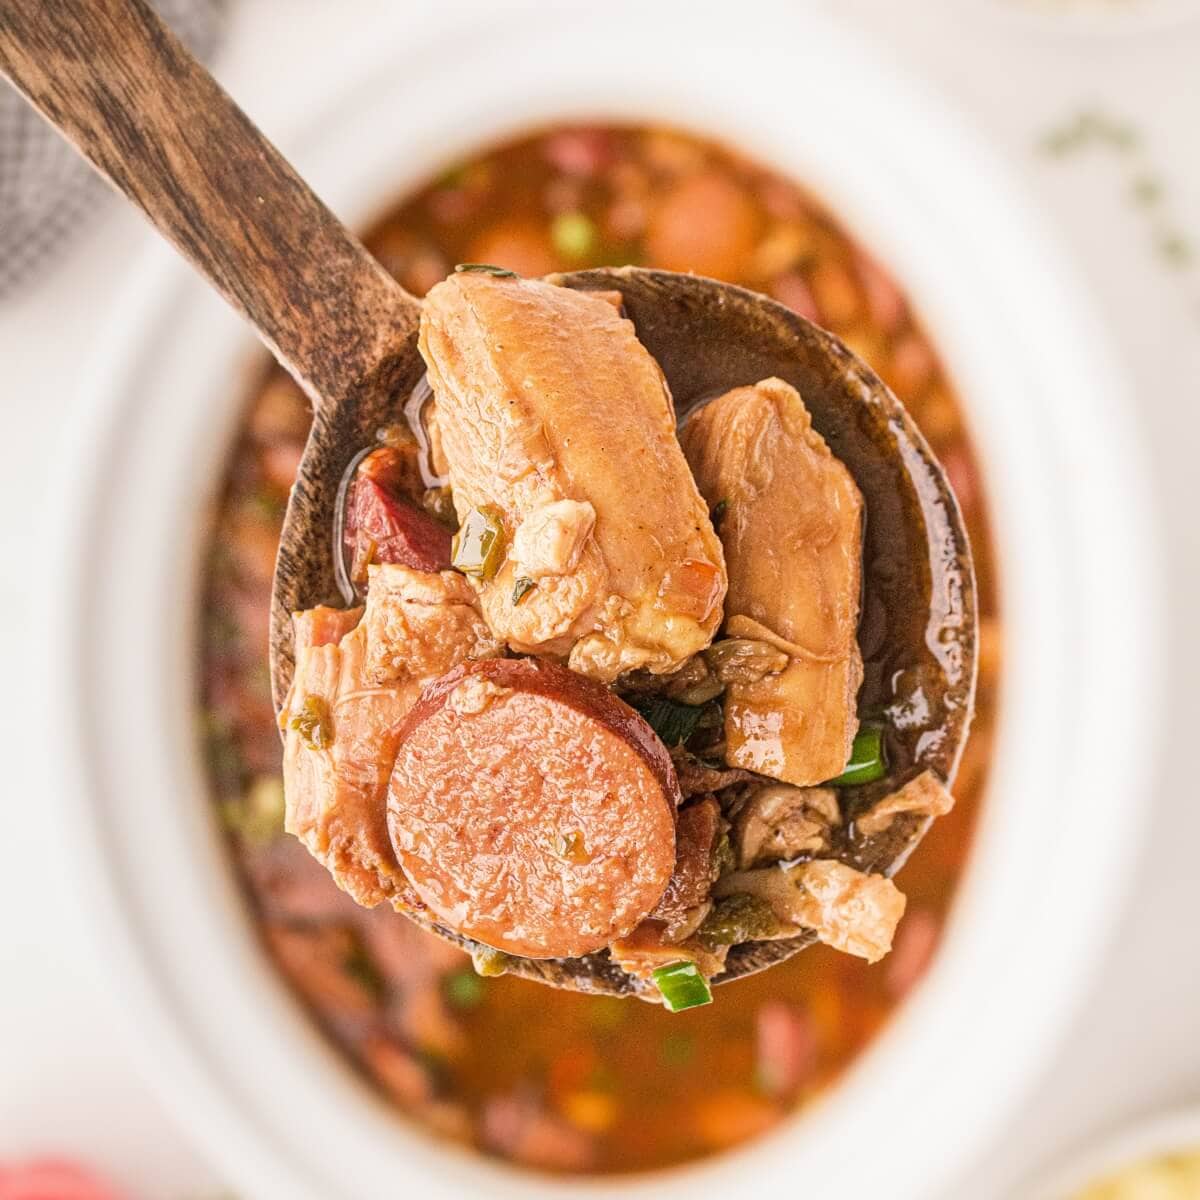 Chicken and sausage on a serving spoon from a slow cooker filled with gumbo.